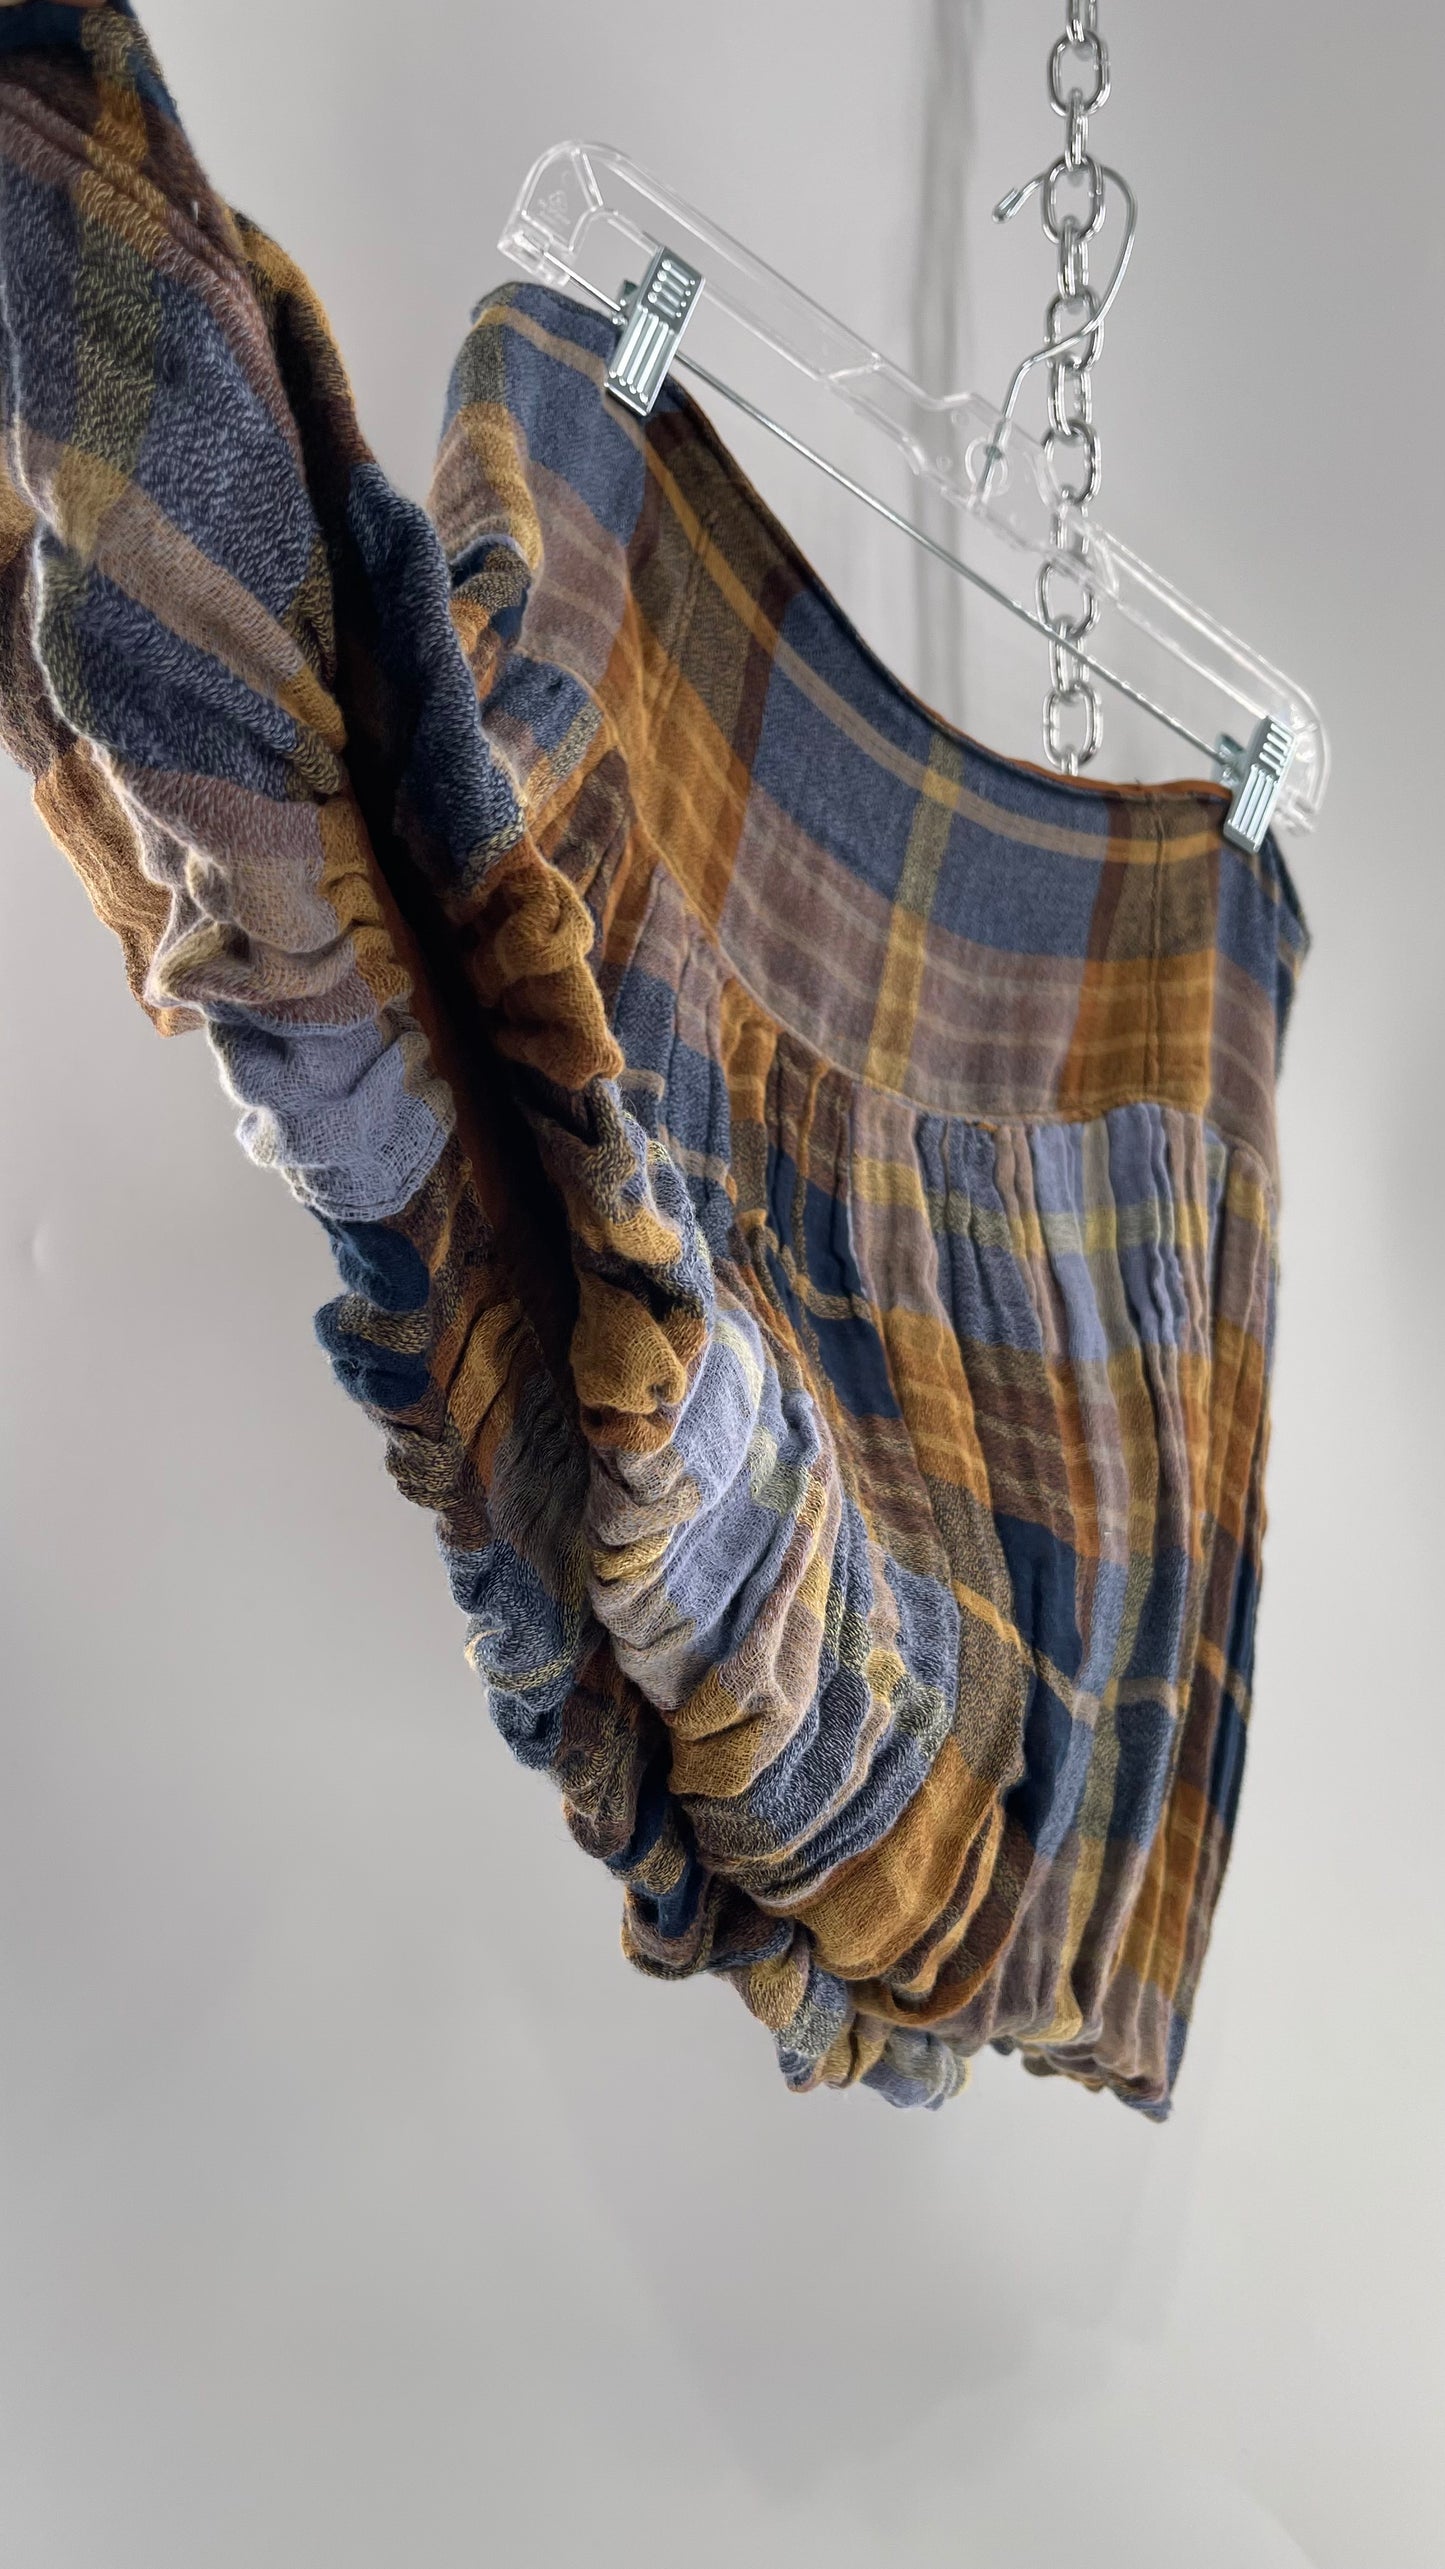 Free People Plaid Blue Brown Mini Skirt with Balloon Hem with Tags Attached (12)